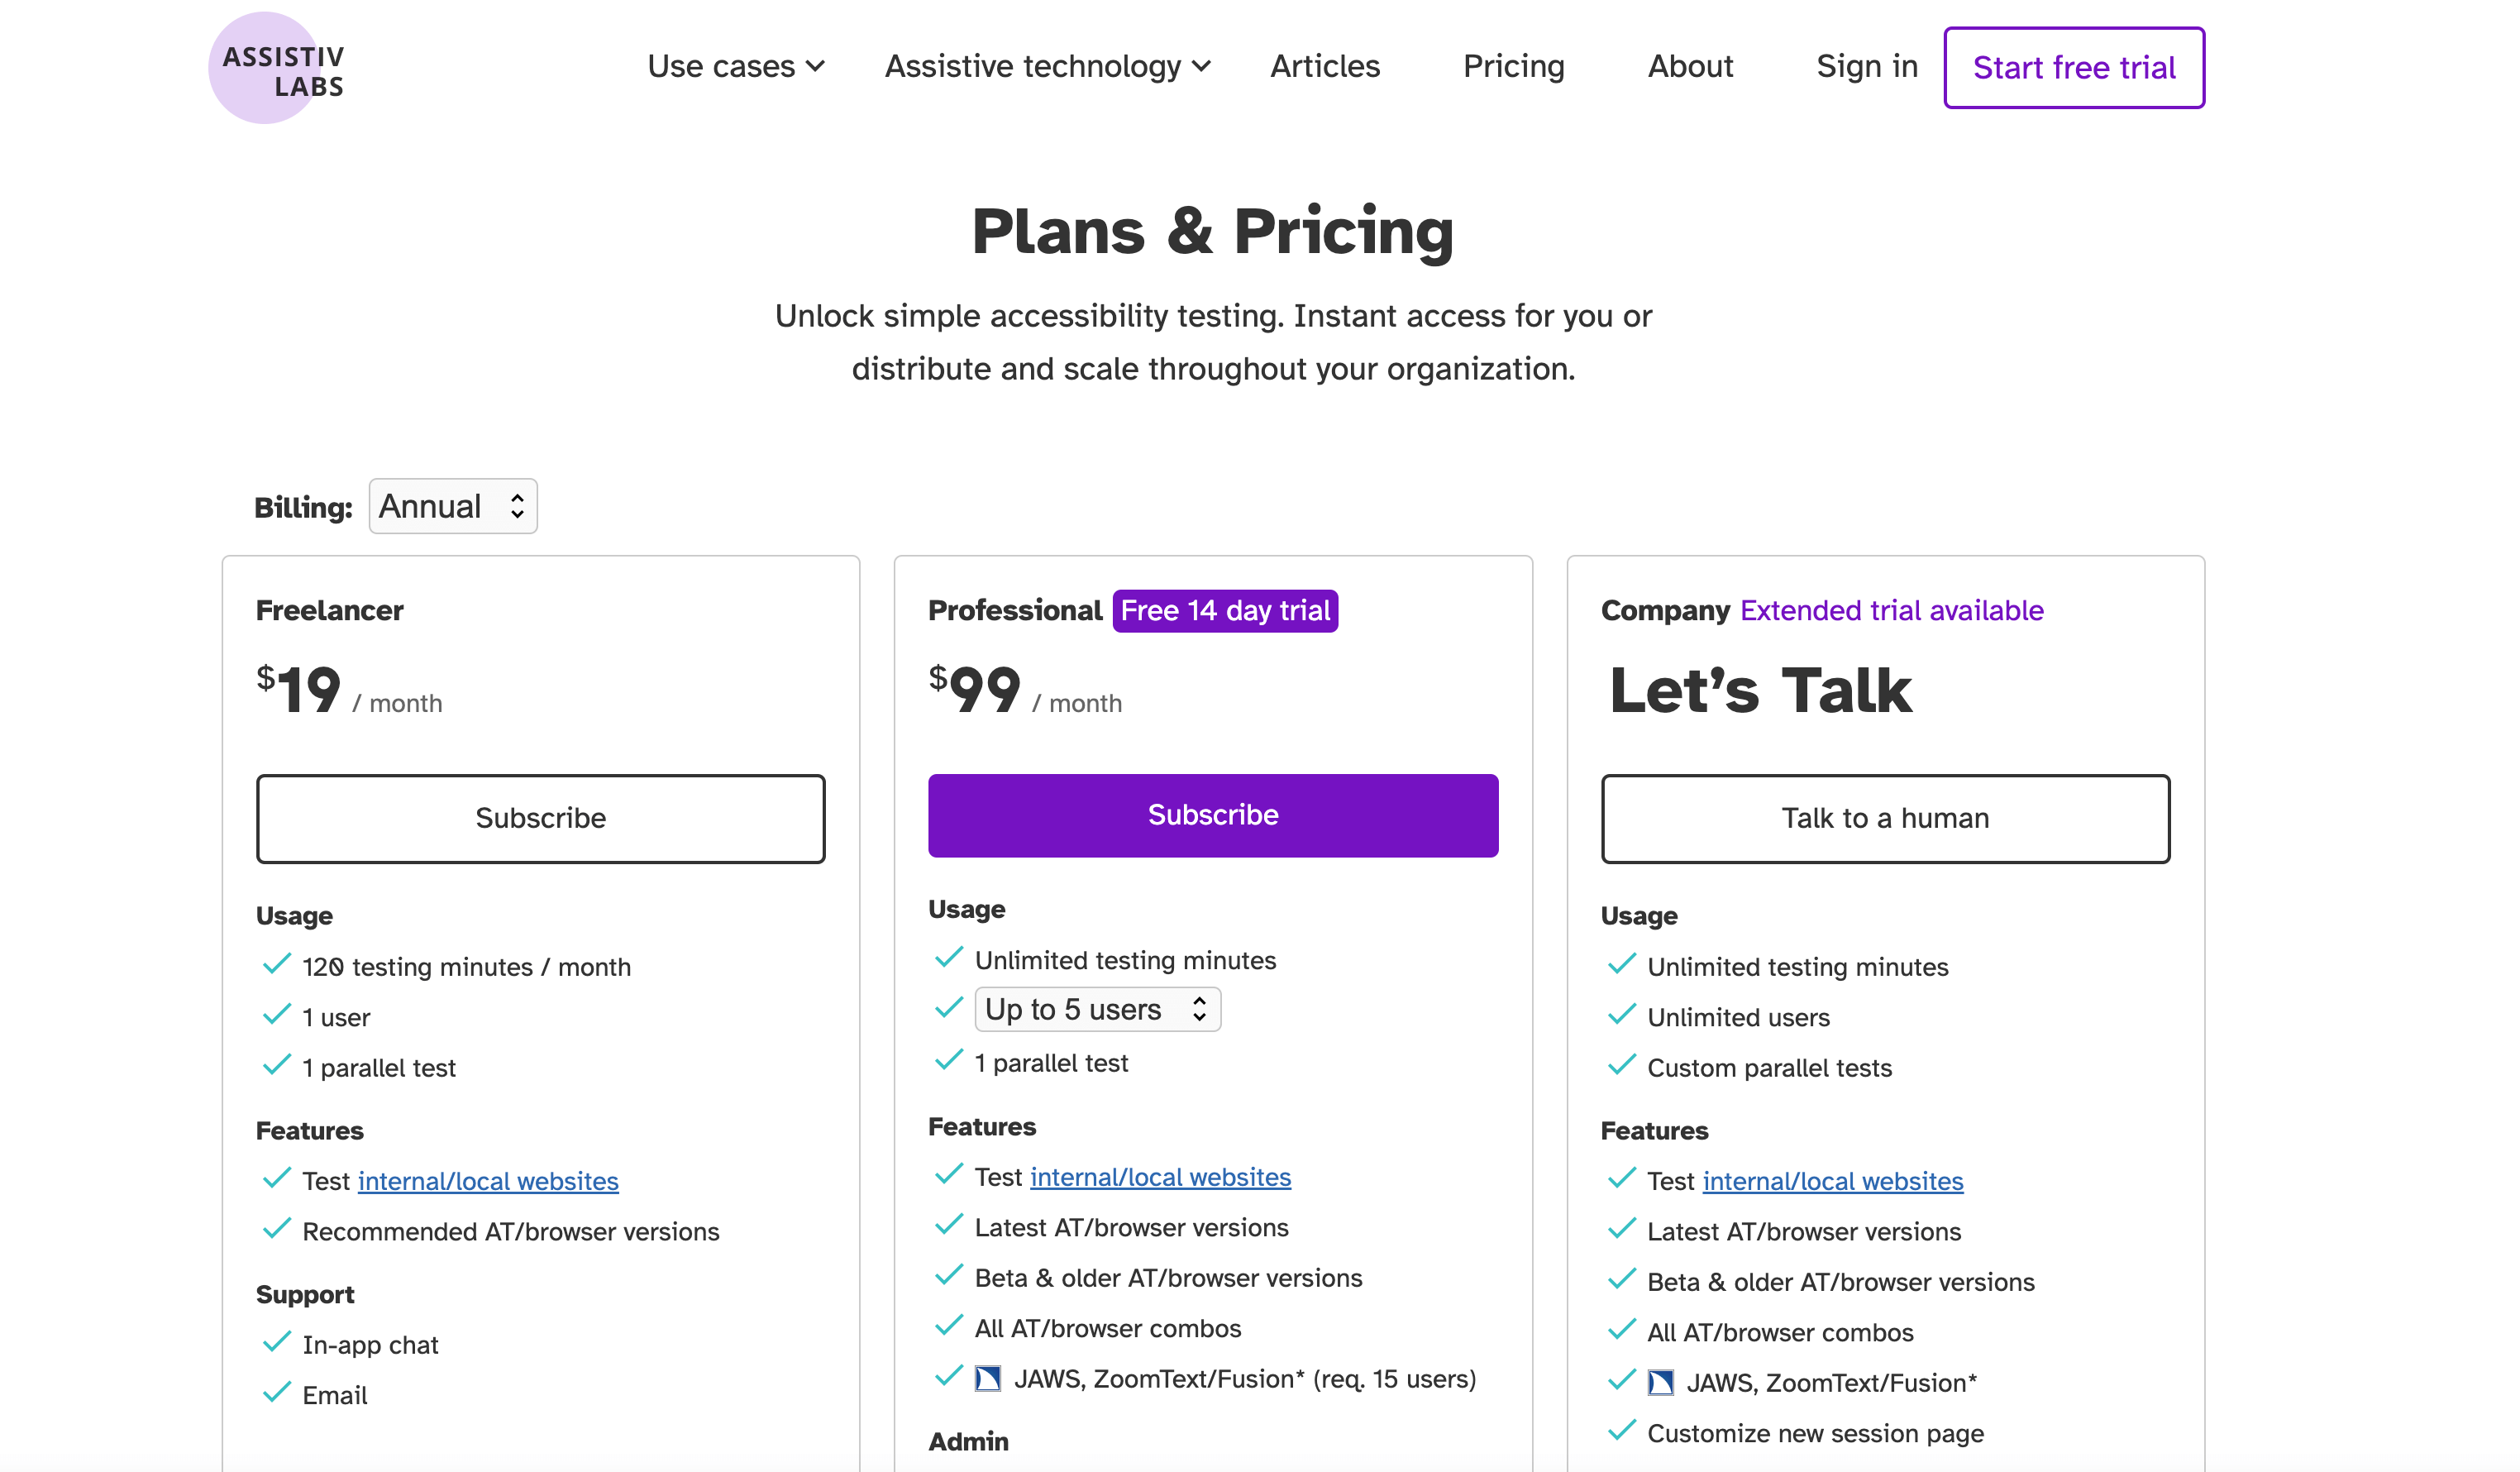 Pricing plans offered by Assistiv Labs